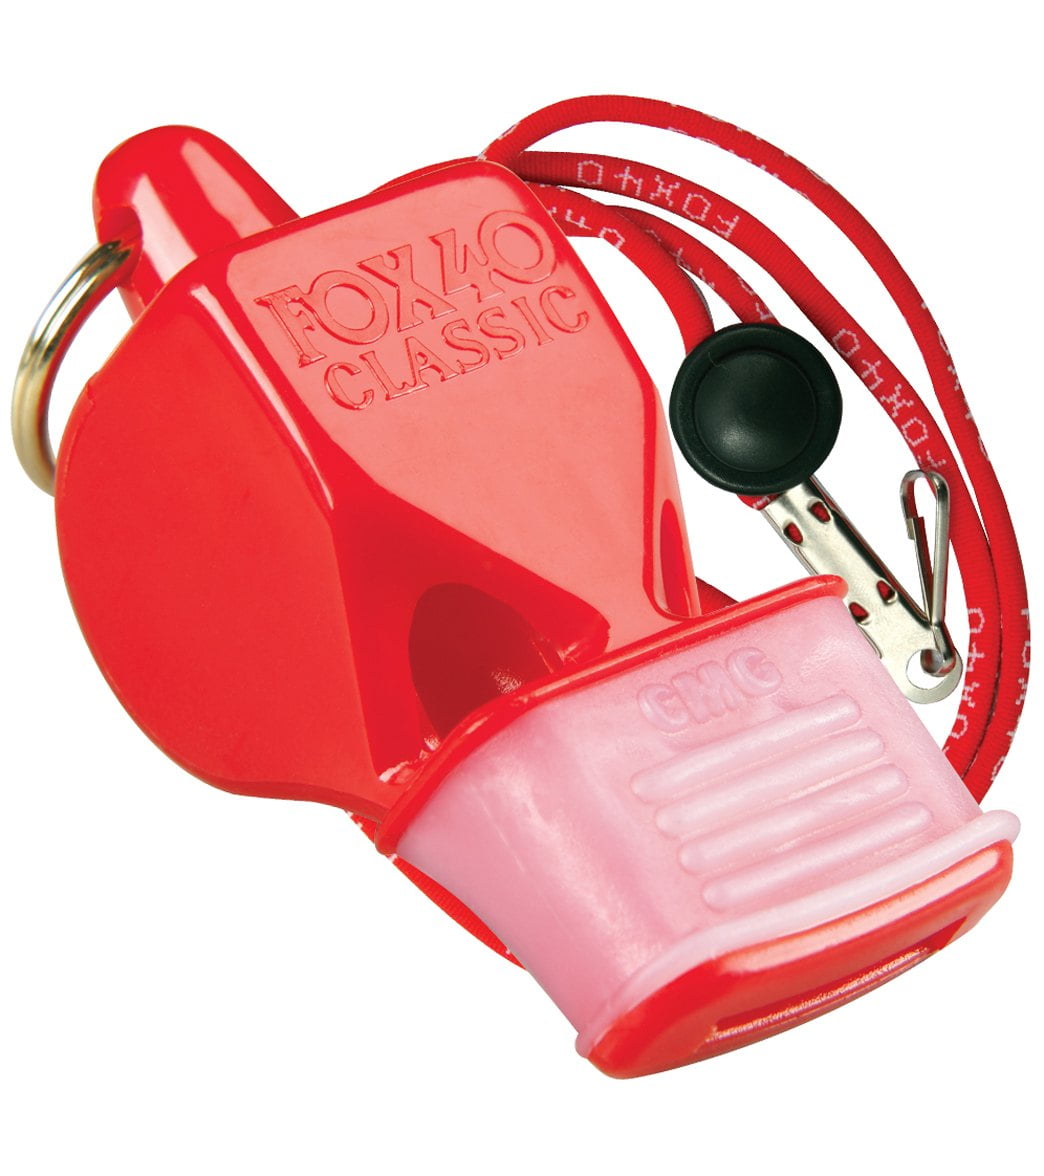 Fox Style Classic CMG Referee Outdoor Indoor Football Sport Safe Whistle Pealess 